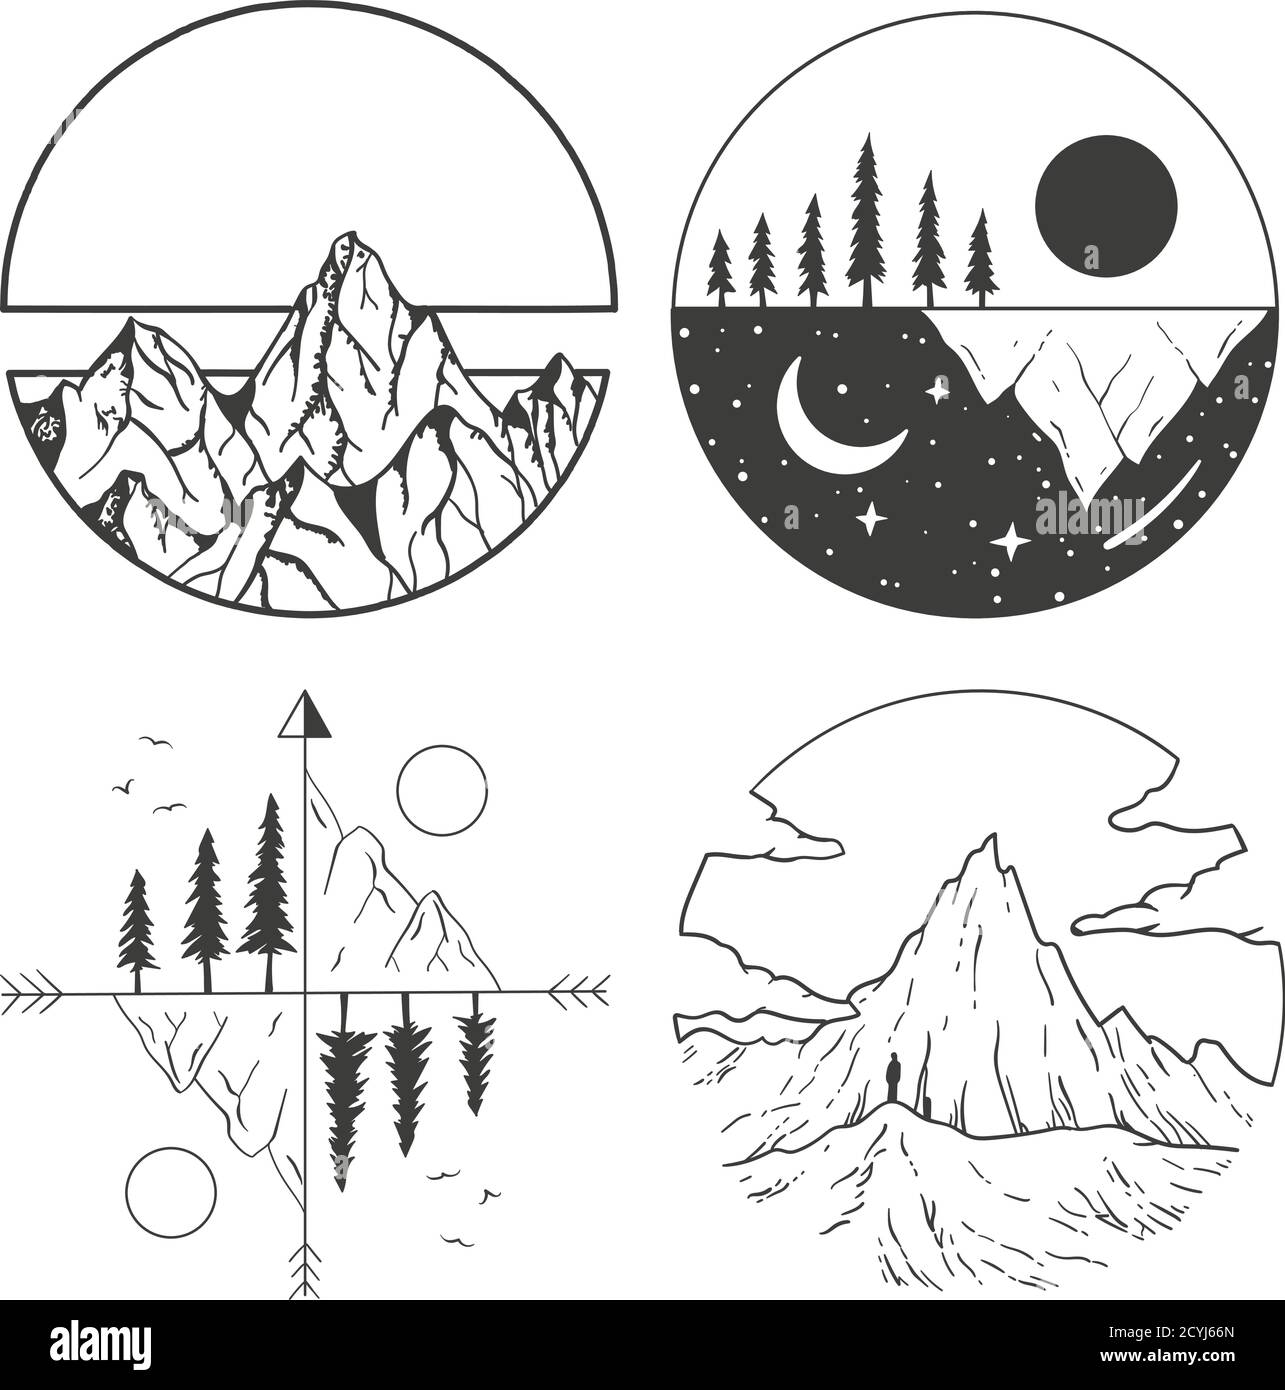 Mountains, sun and clouds in geometric shapes. Stock Vector